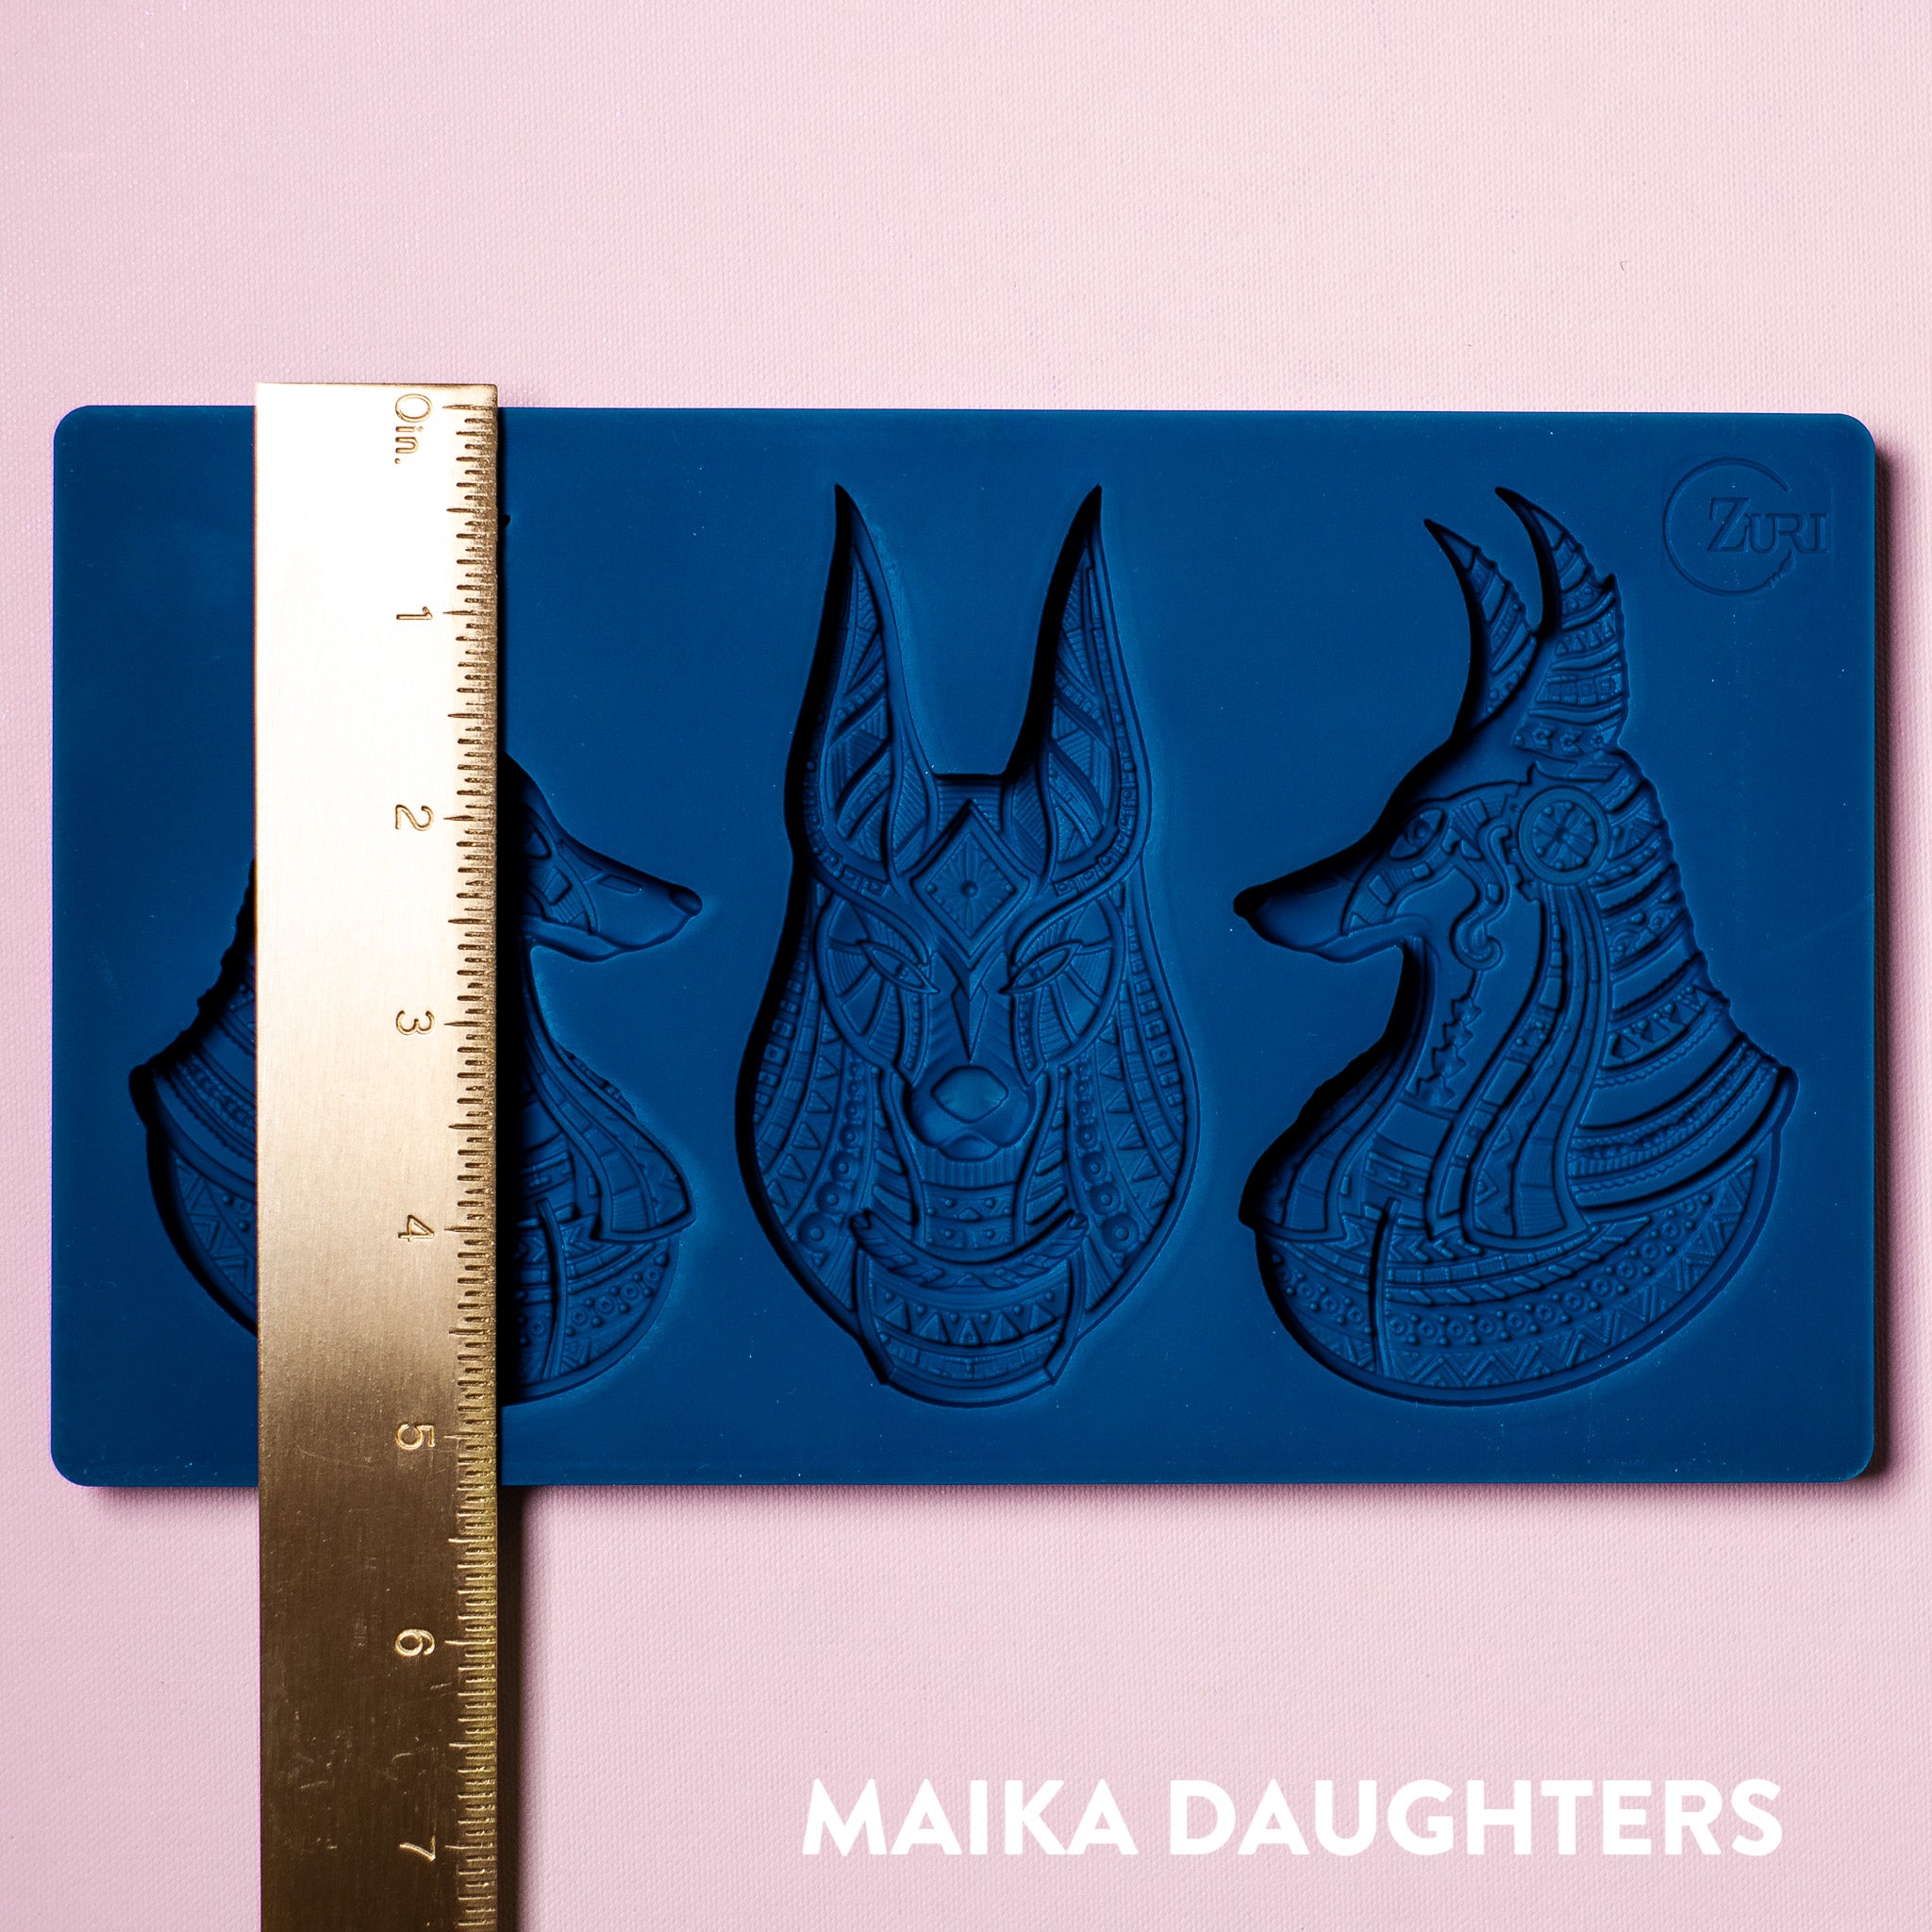 A blue silicone mold of Zuri's Anubis Heads is on a light pink background. A gold ruler showing a measurement of 5.25 inches is on top of the mold.